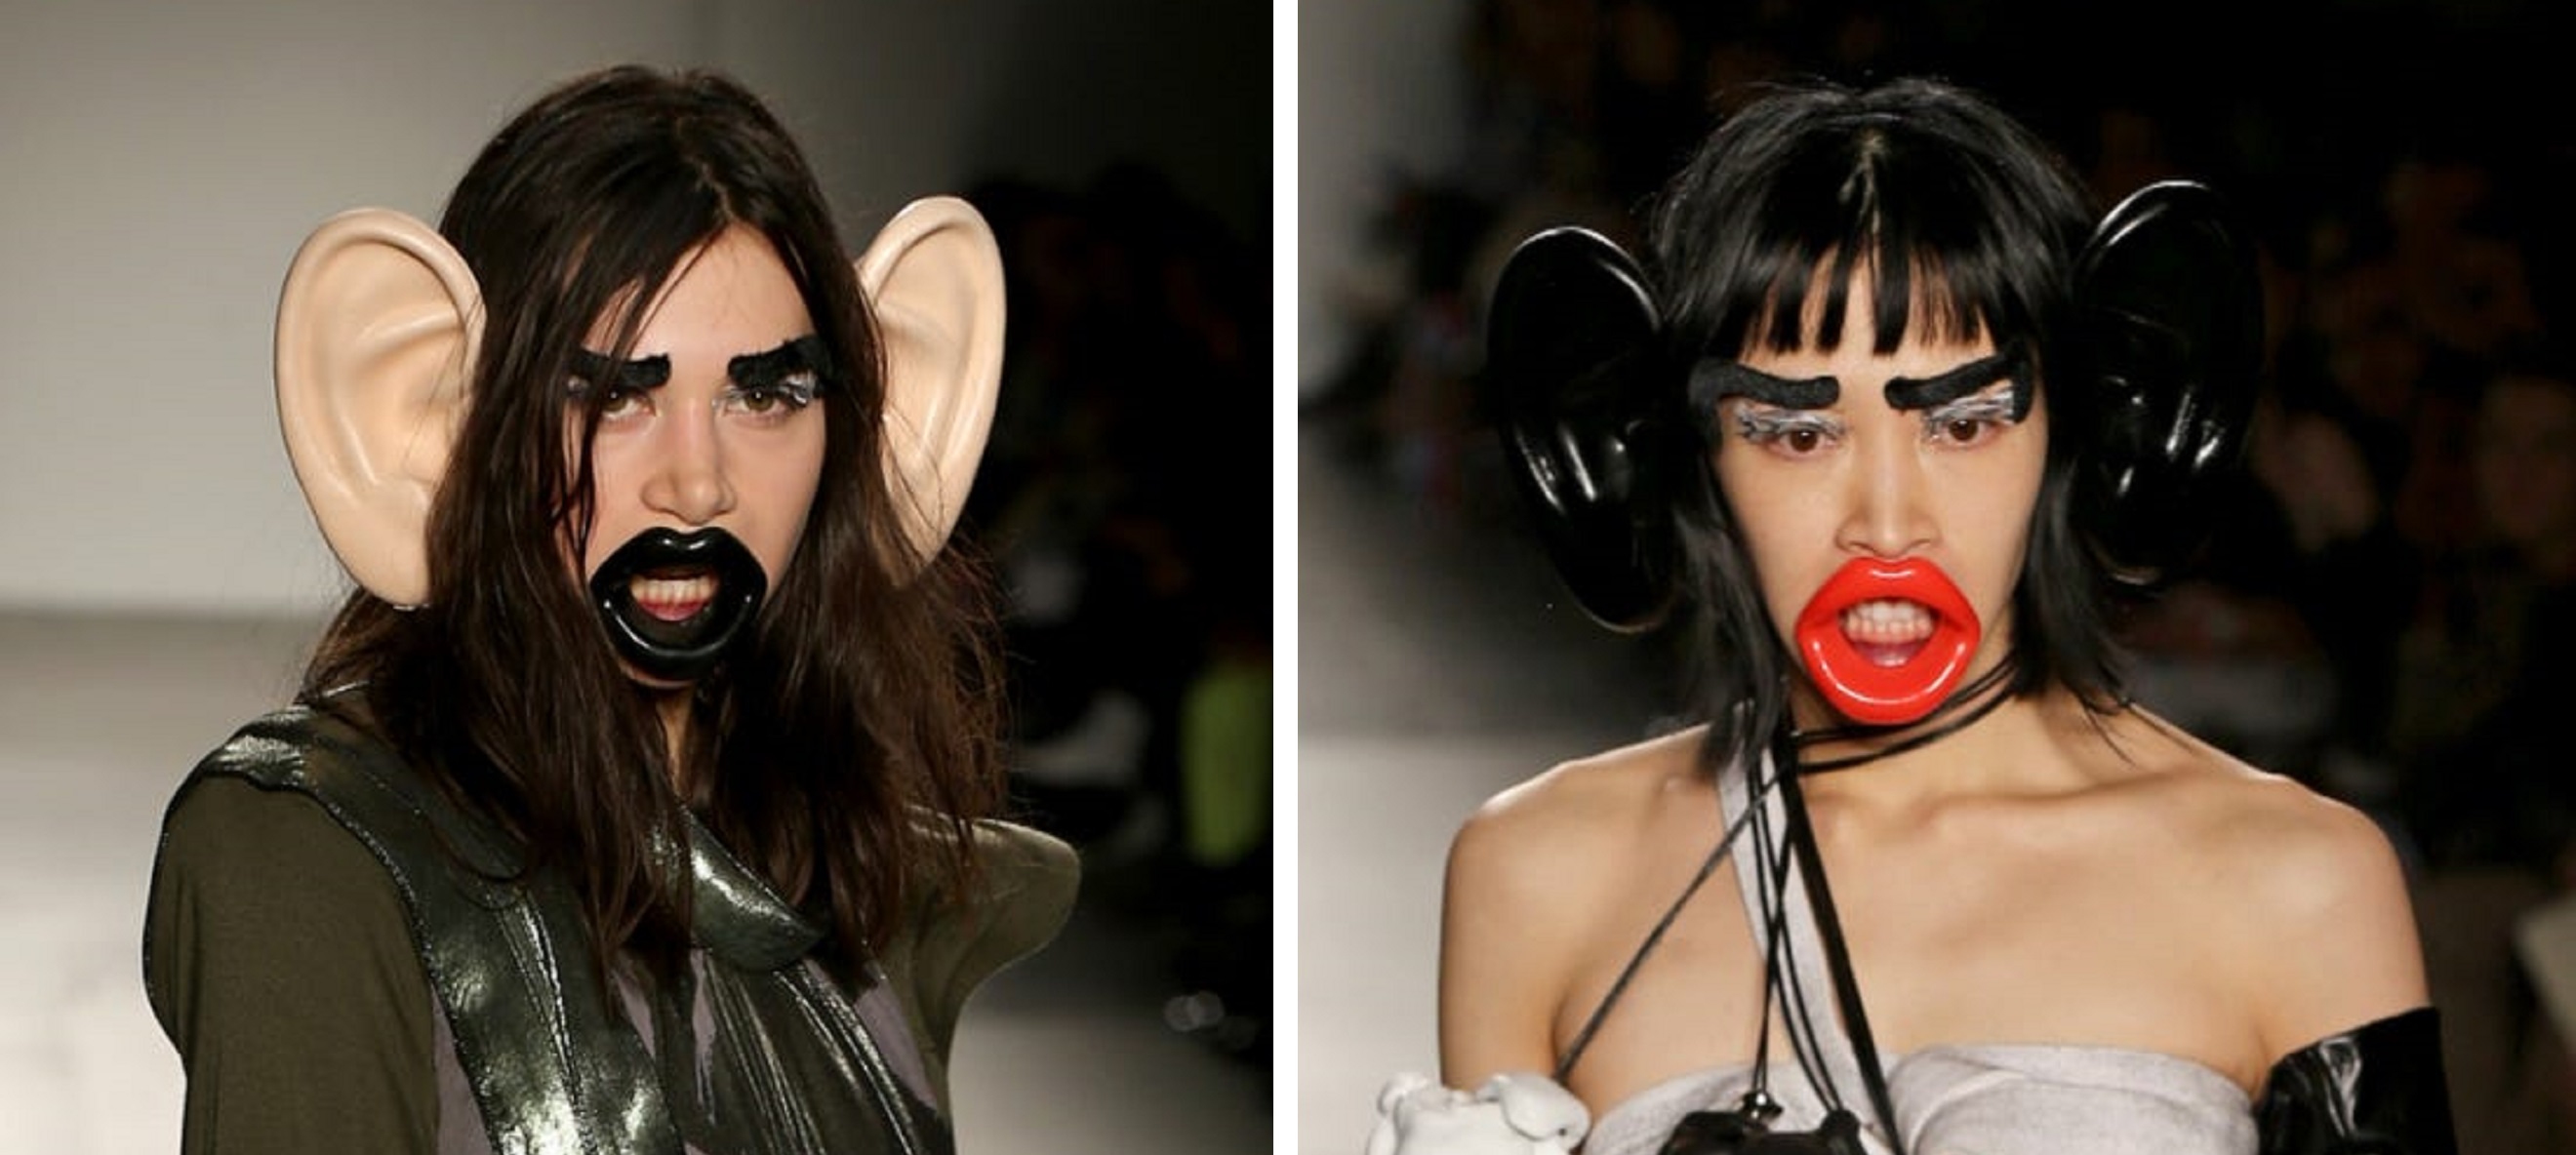 Fashion Institute of Technology Issues Apology After ‘Racist’ Runway Show Featuring Monkey Ears and Lips